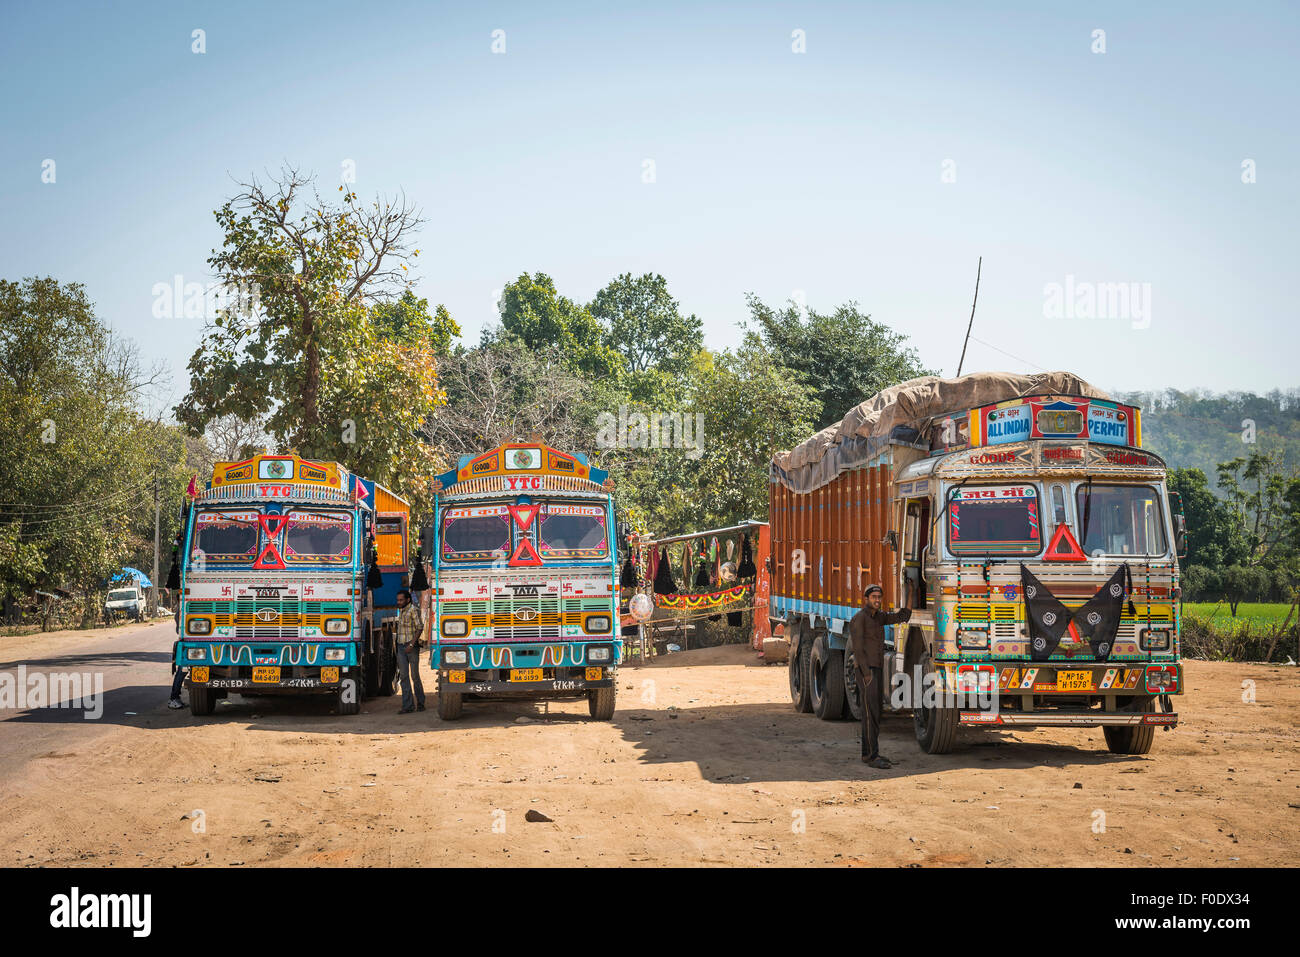 Colourfully decorated goods lorries in a layby in Madhya Pradesh, India Stock Photo